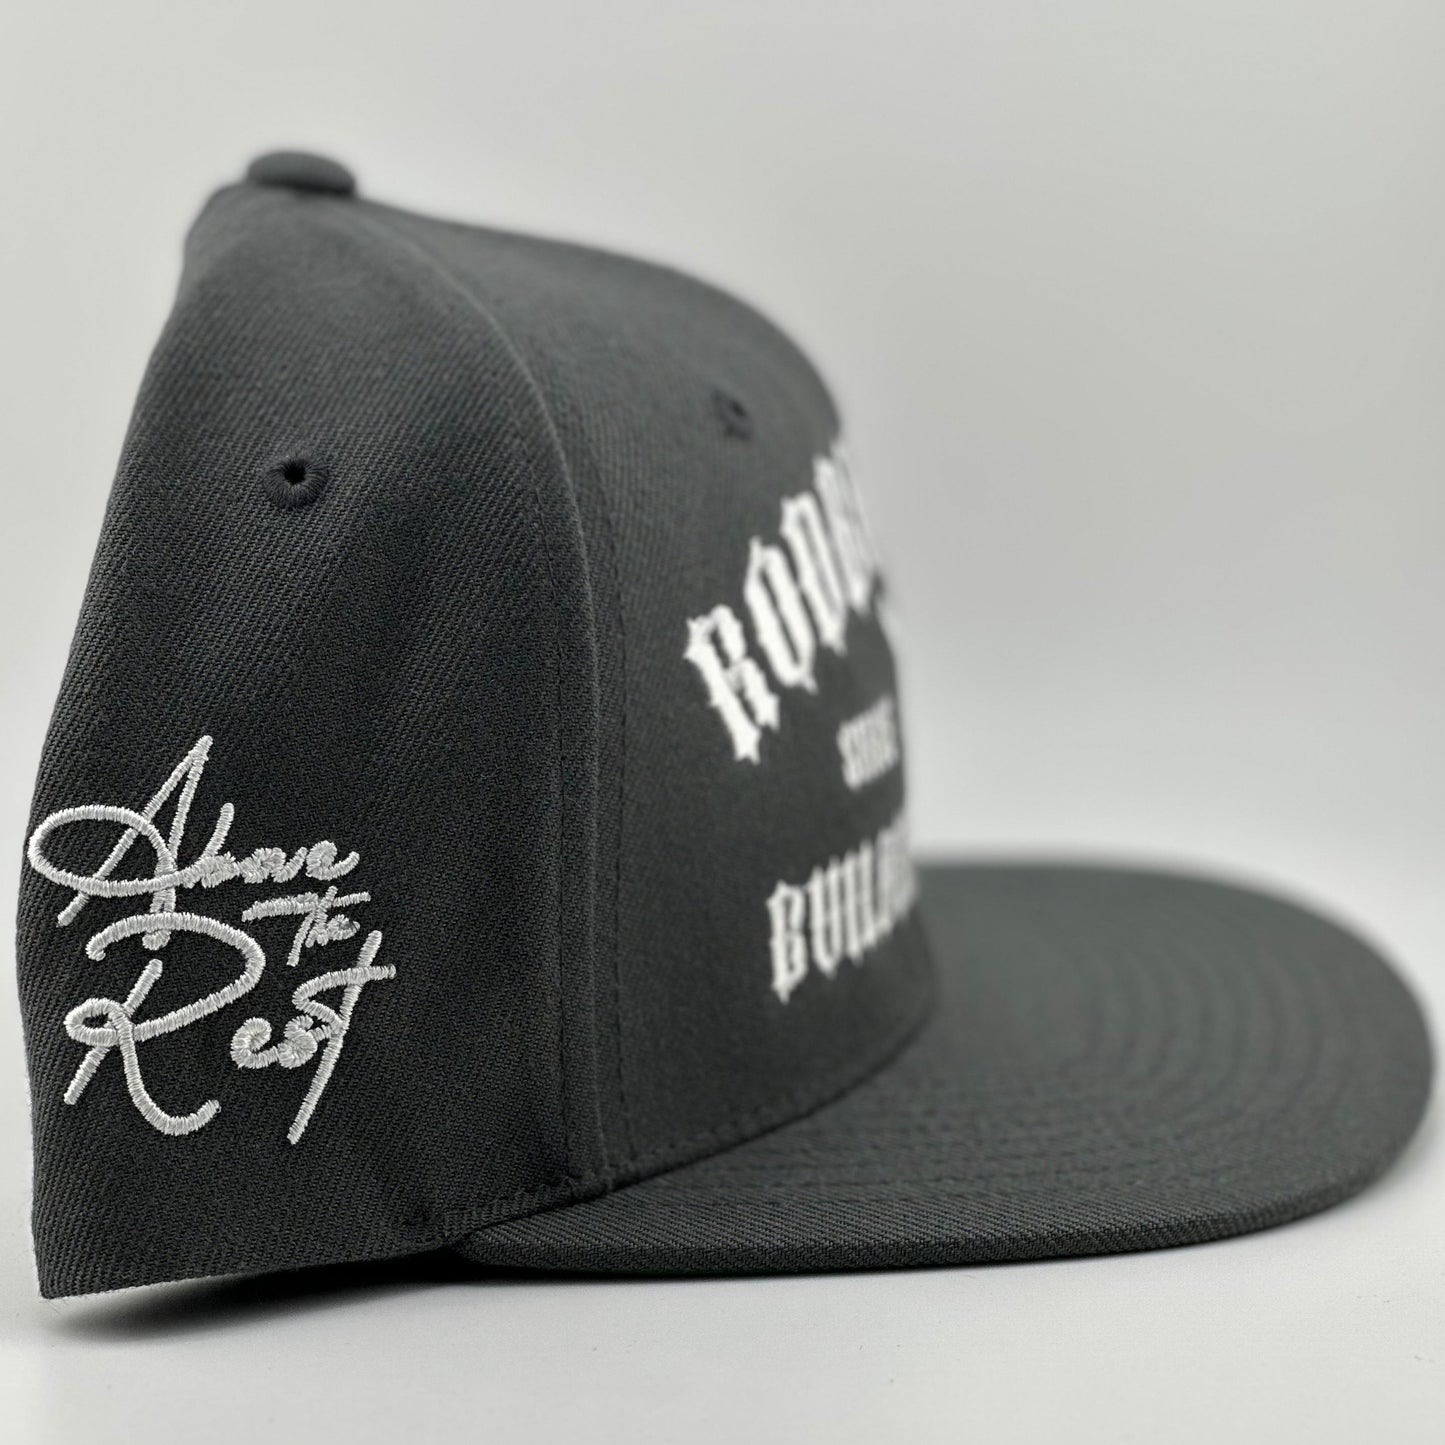 RODBUSTERS BUILDING AMERICA SNAPBACK HAT